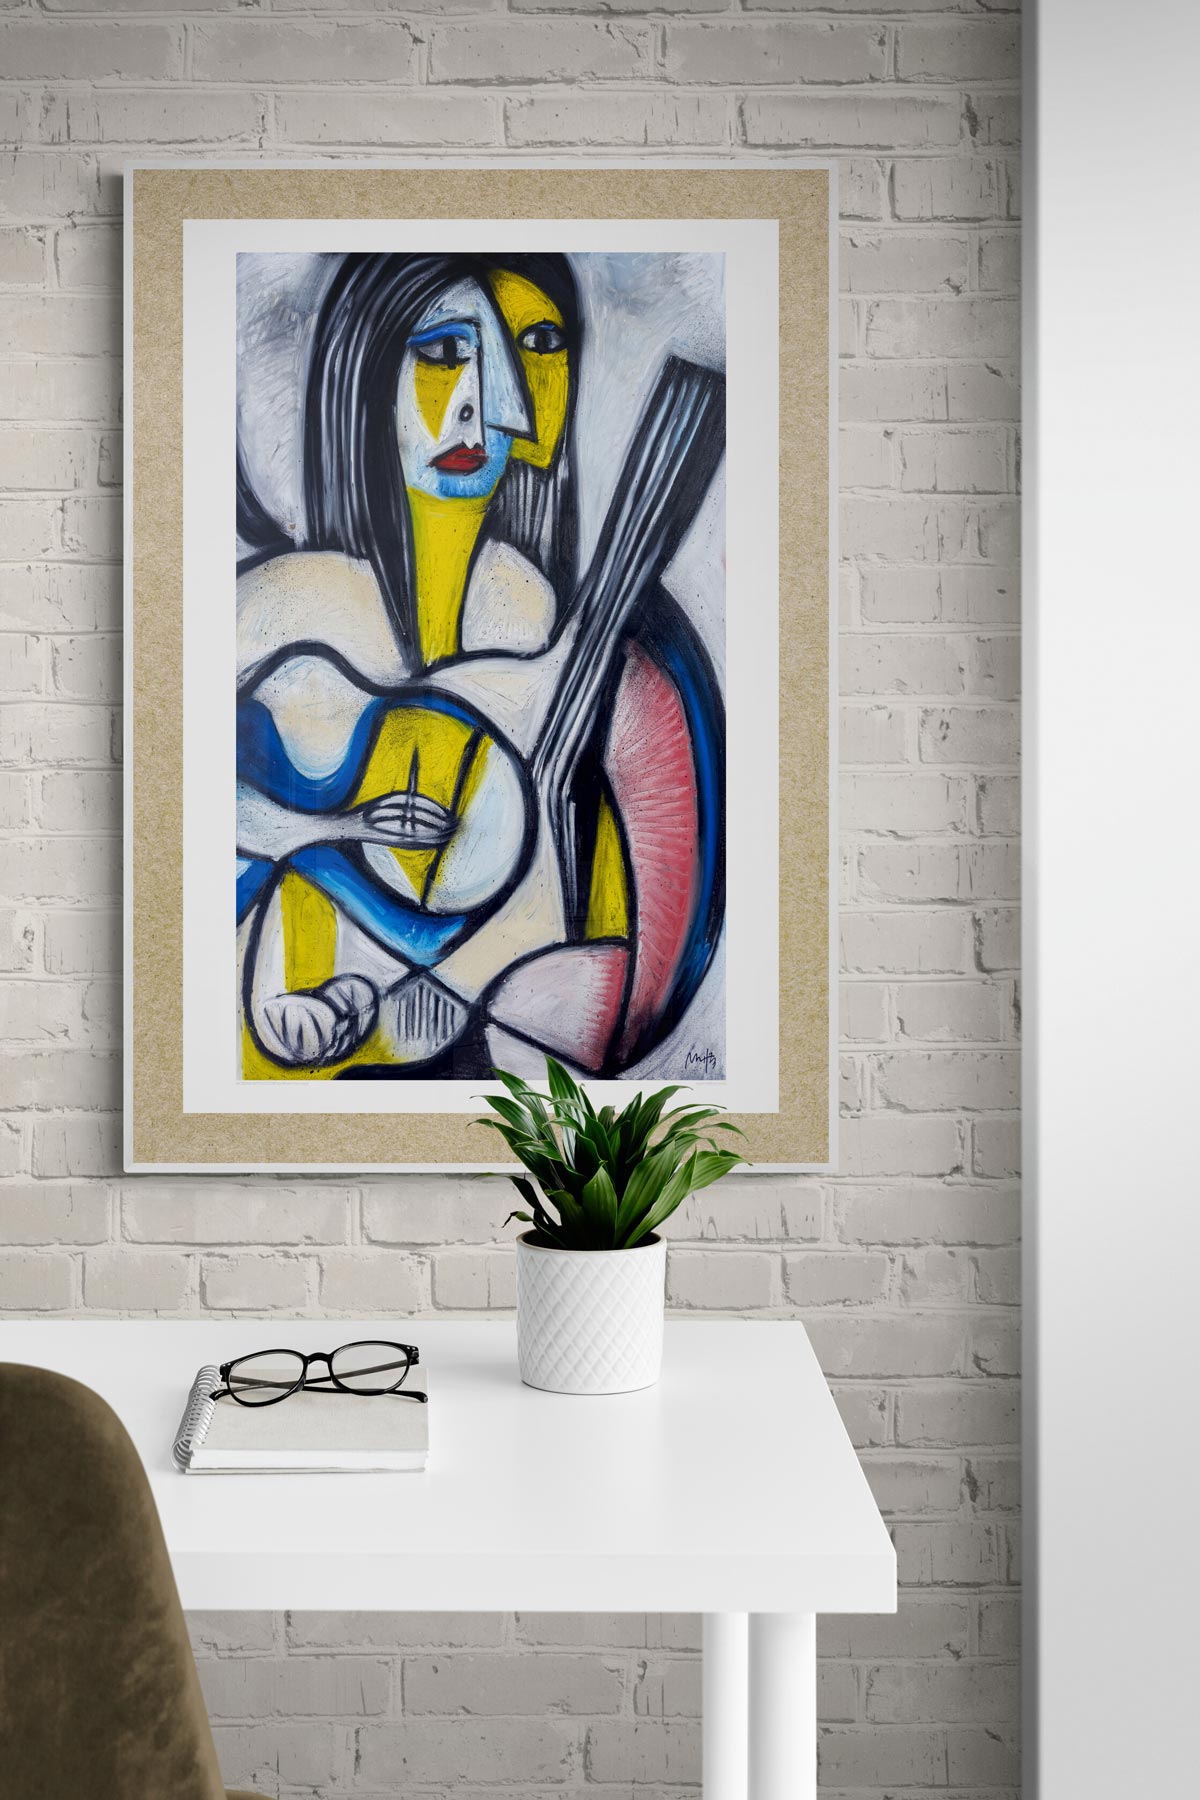 Woman With Guitar, Open Edition Print